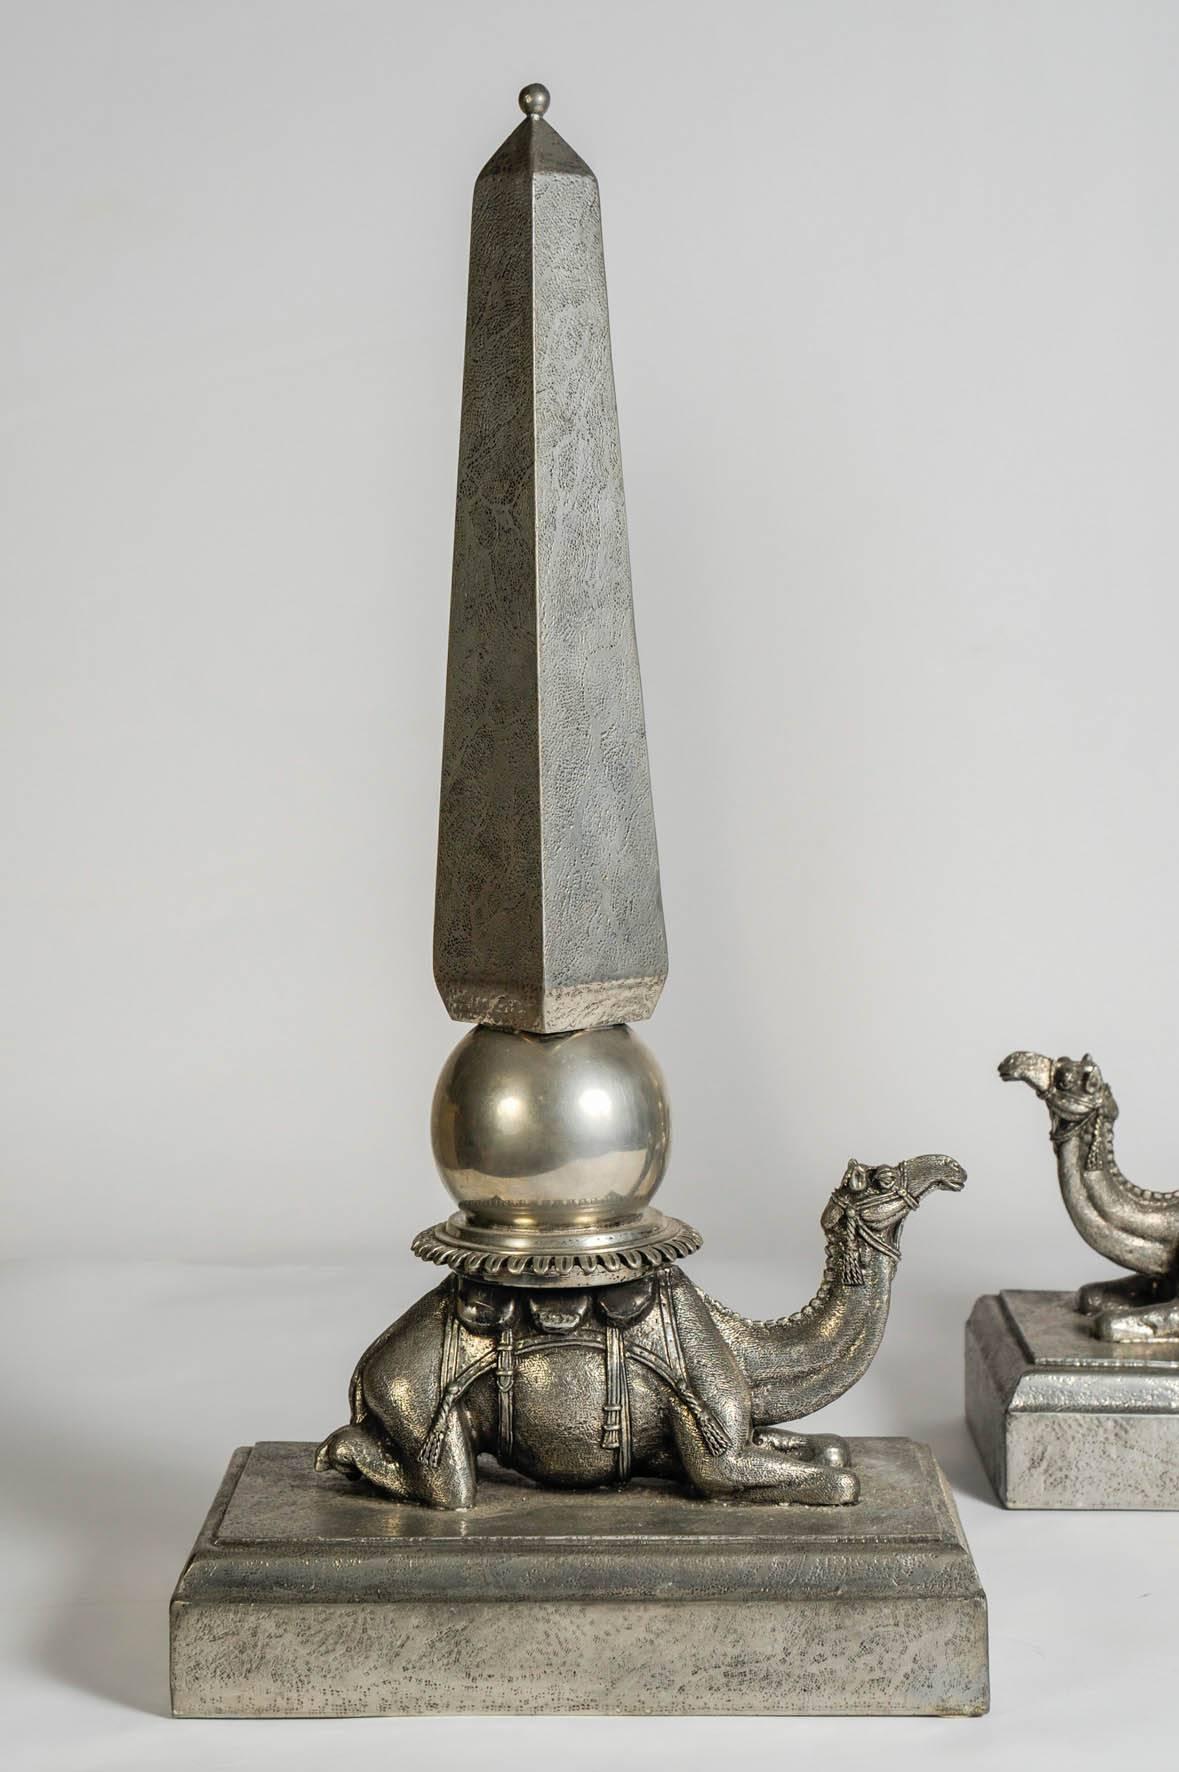 Fantastic pair of pewter showing a camel carry on an obelisks 
Signed Figura Piero
For Atena.